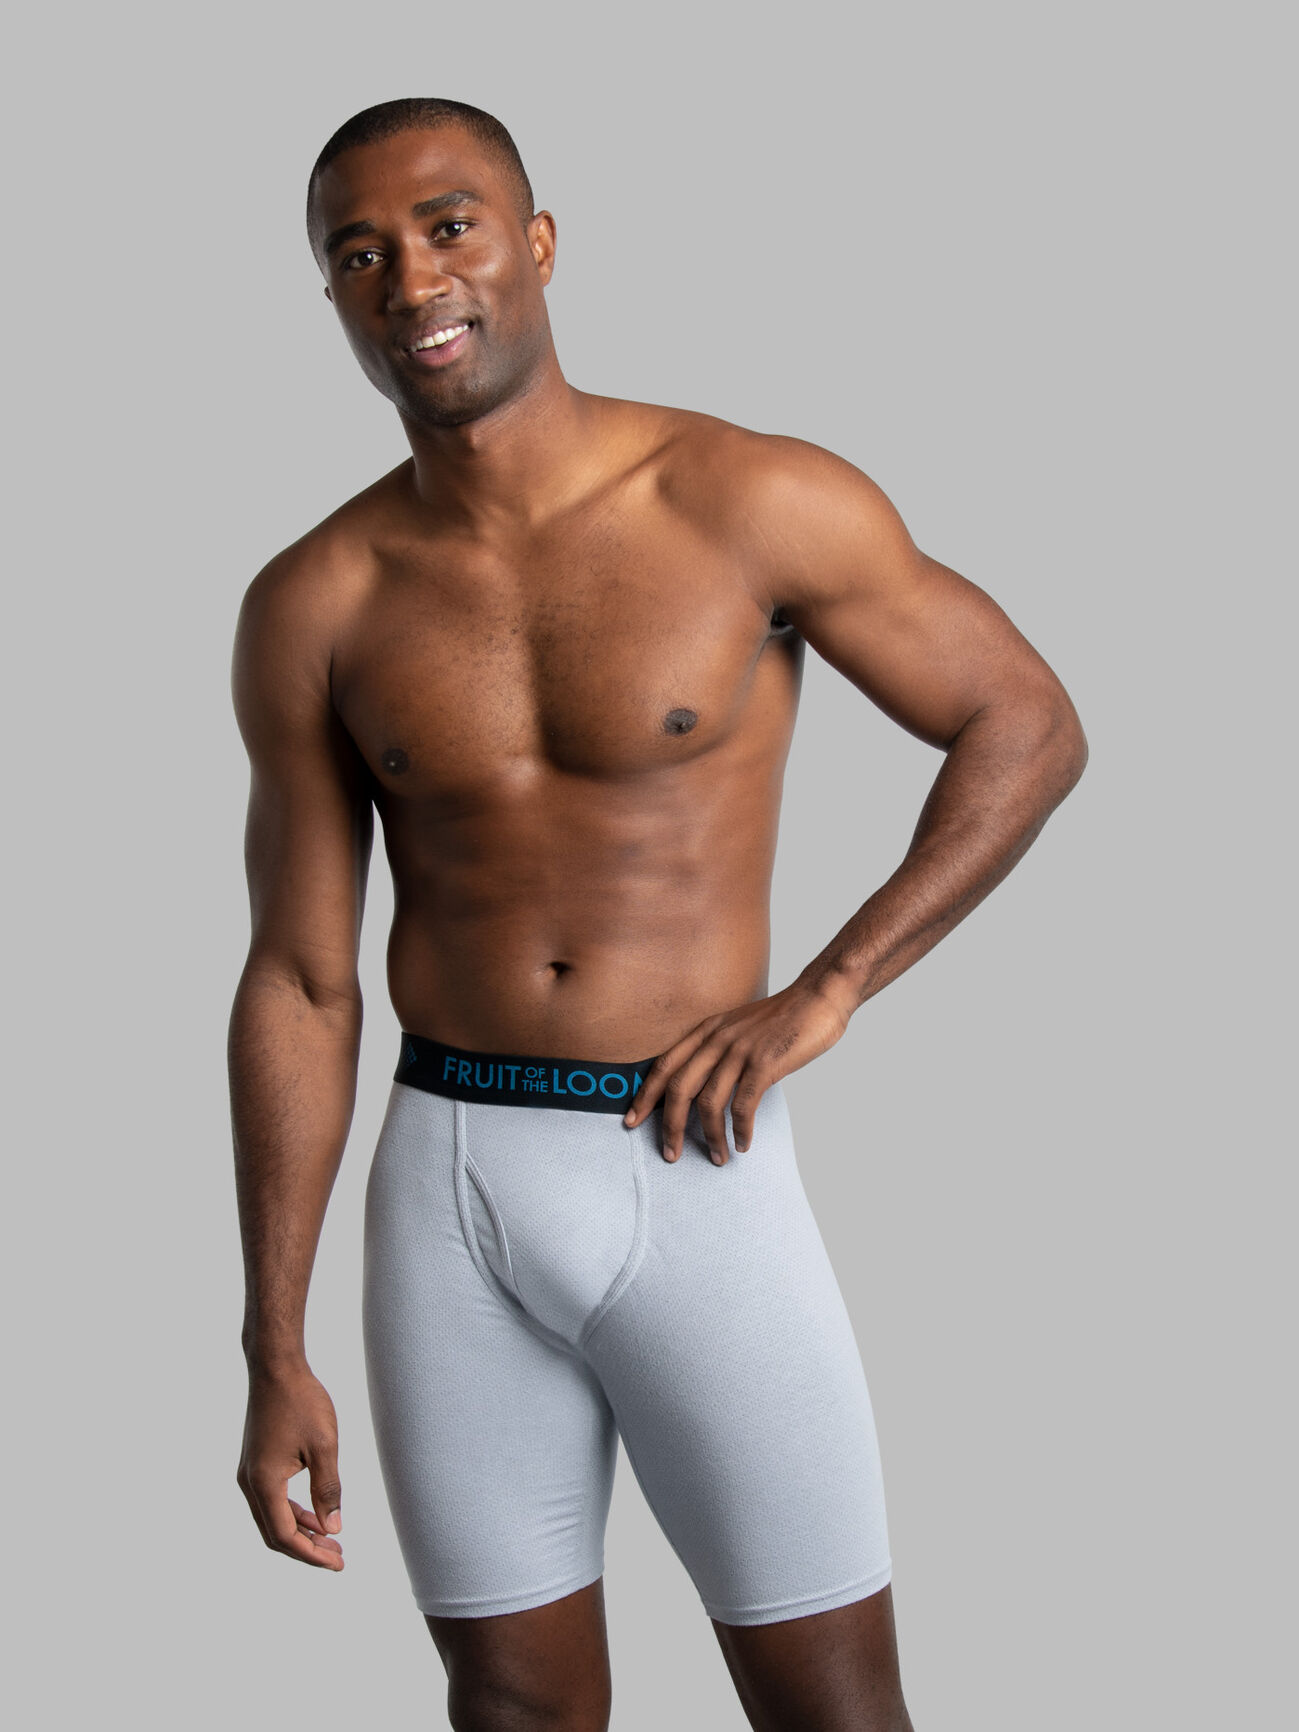 Men's Breathable Long Leg Boxer Briefs, 2XL Black and Gray 3 Pack Assorted